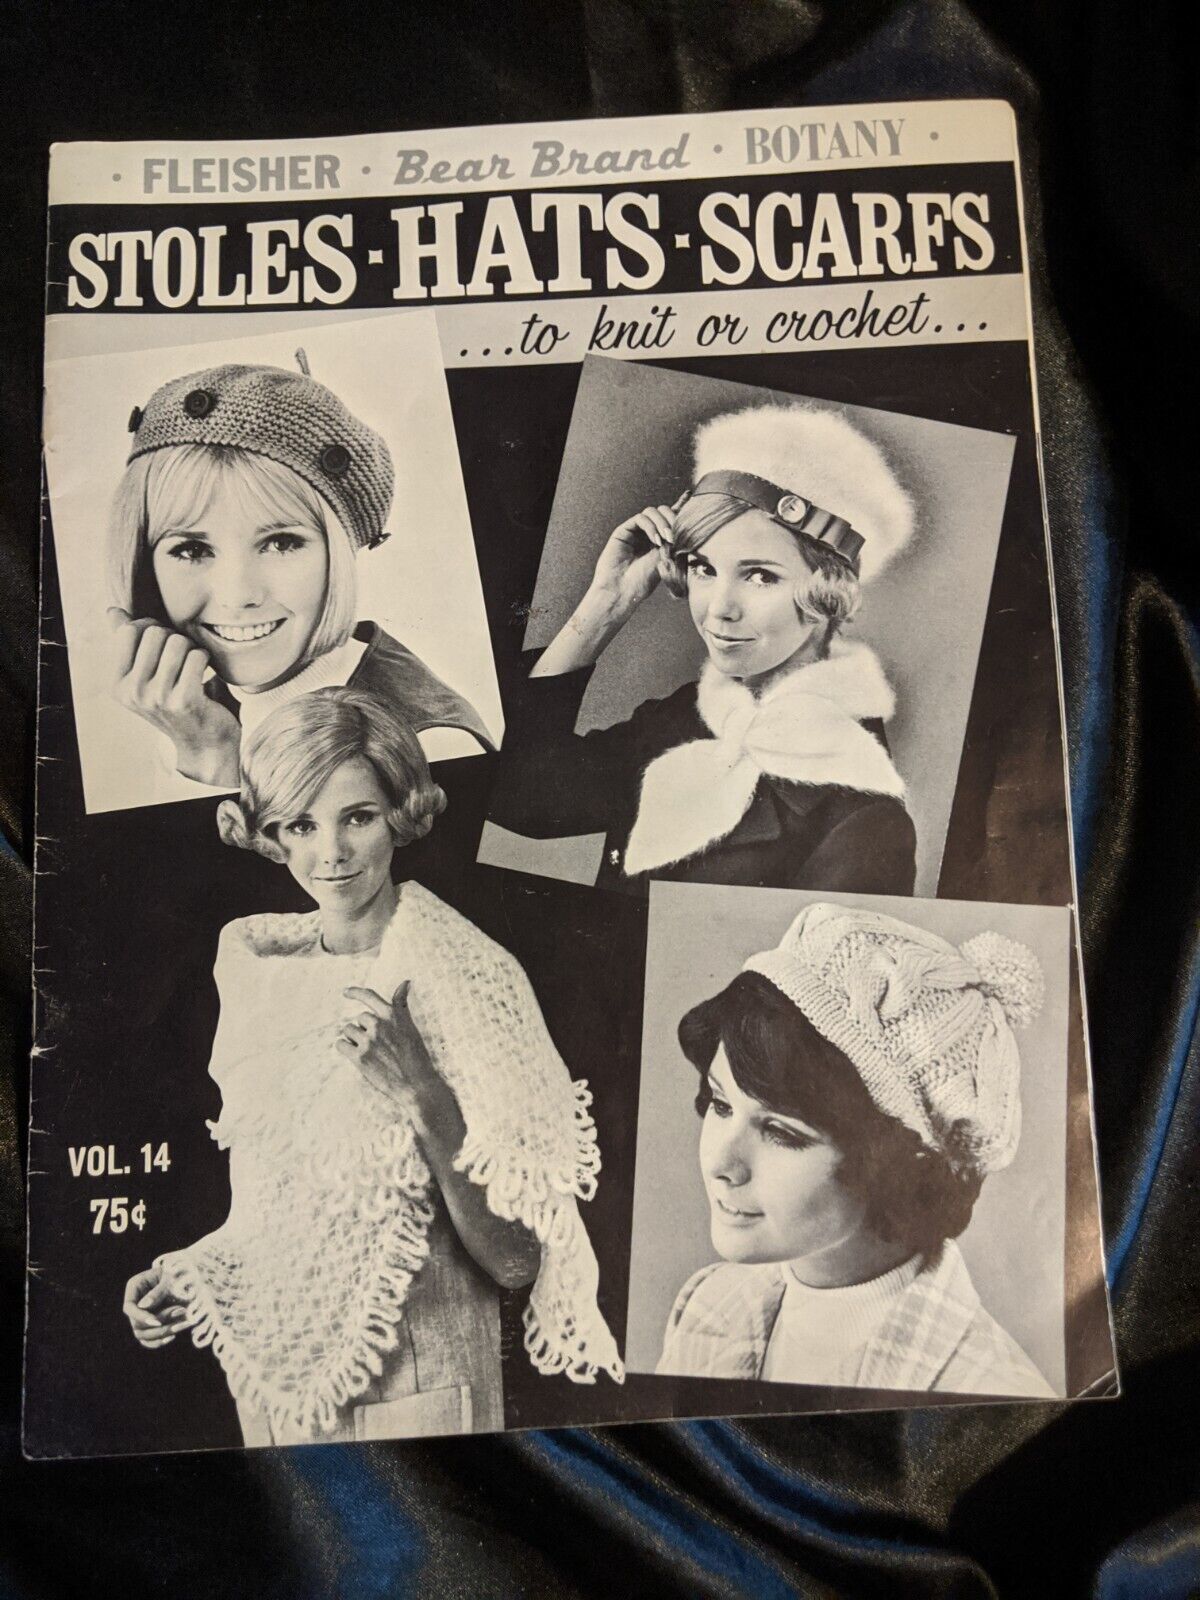 Stoles-Hats-Scarfs to Knit or Crochet Book Vol14,1954 Fleisher-Bear Brand-Botany - $6.92